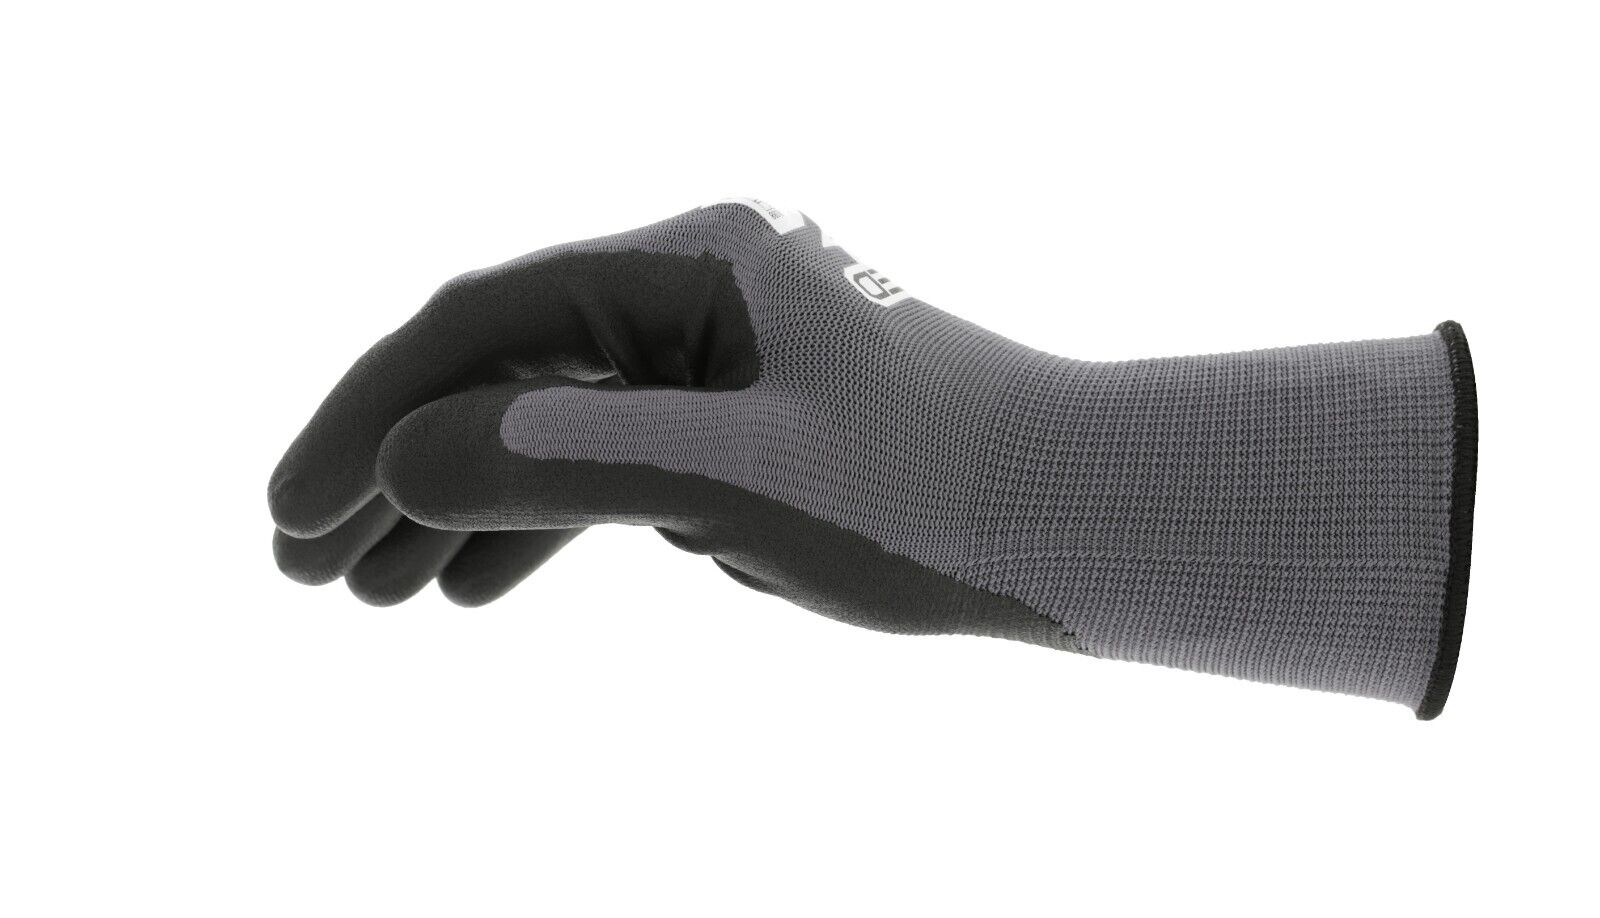 Mechanix Wear Nitrile Coated Cut-Resistant Gloves, Grey, 8.19 in. long, 13 Ga thick, Nylon, 12 Pair in a Pack (SM, MD, L, XL, XXL)